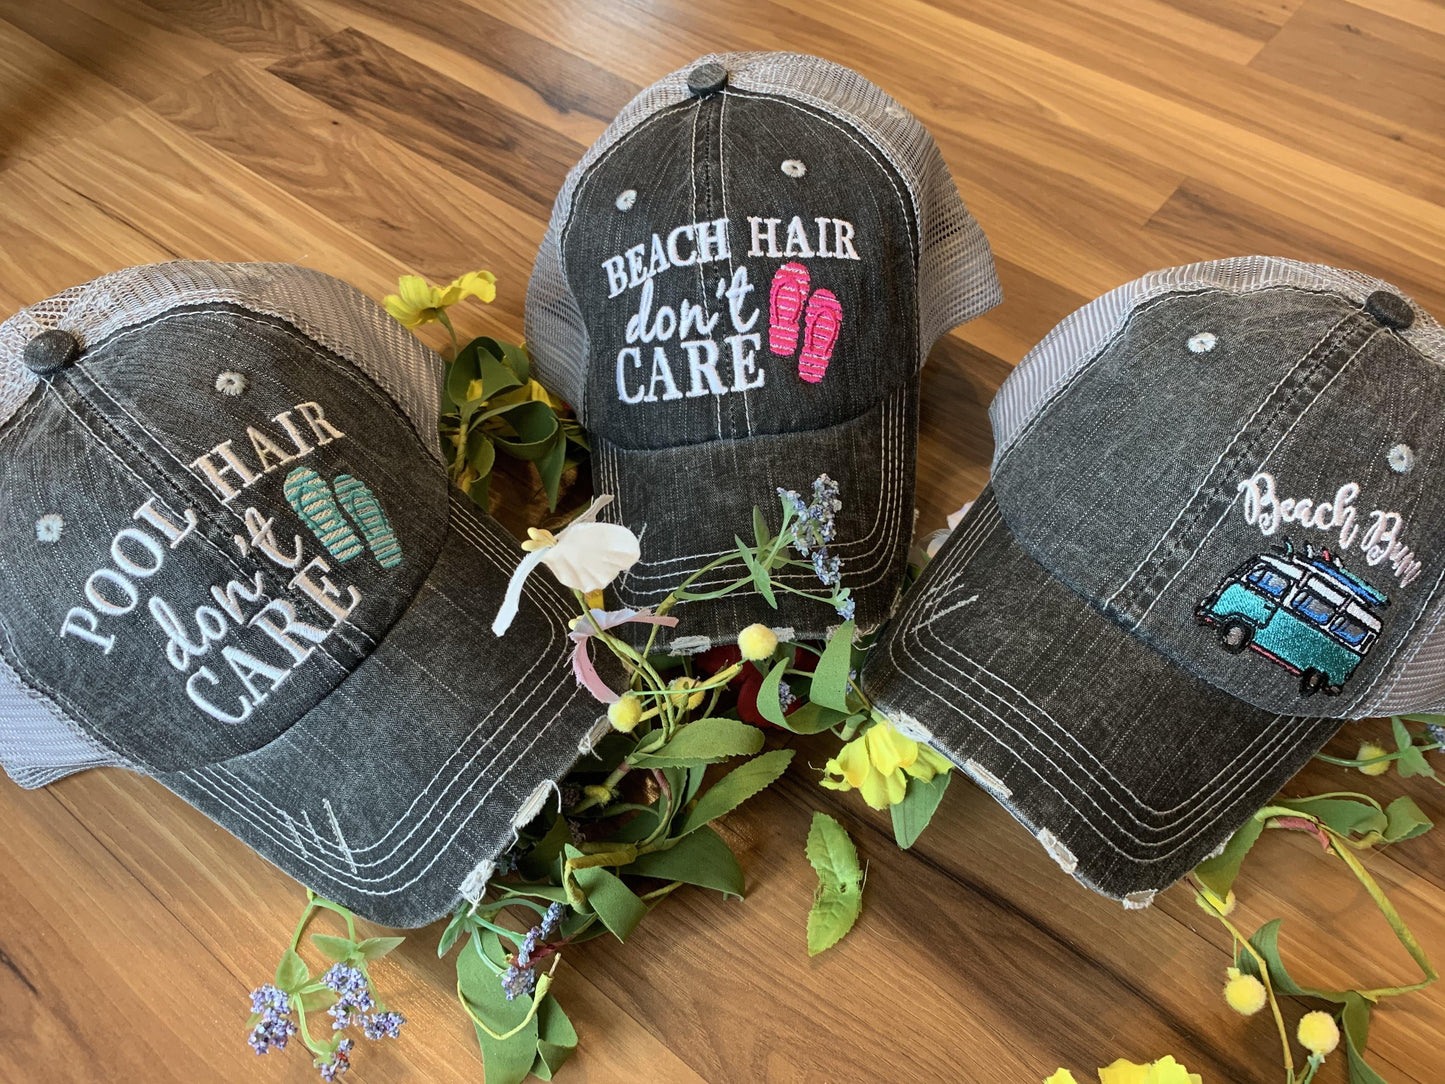 Basketball hats! Basketball mom | Customize | Embroidered distressed gray women’s trucker caps • Add names, number, BLING! - Stacy's Pink Martini Boutique